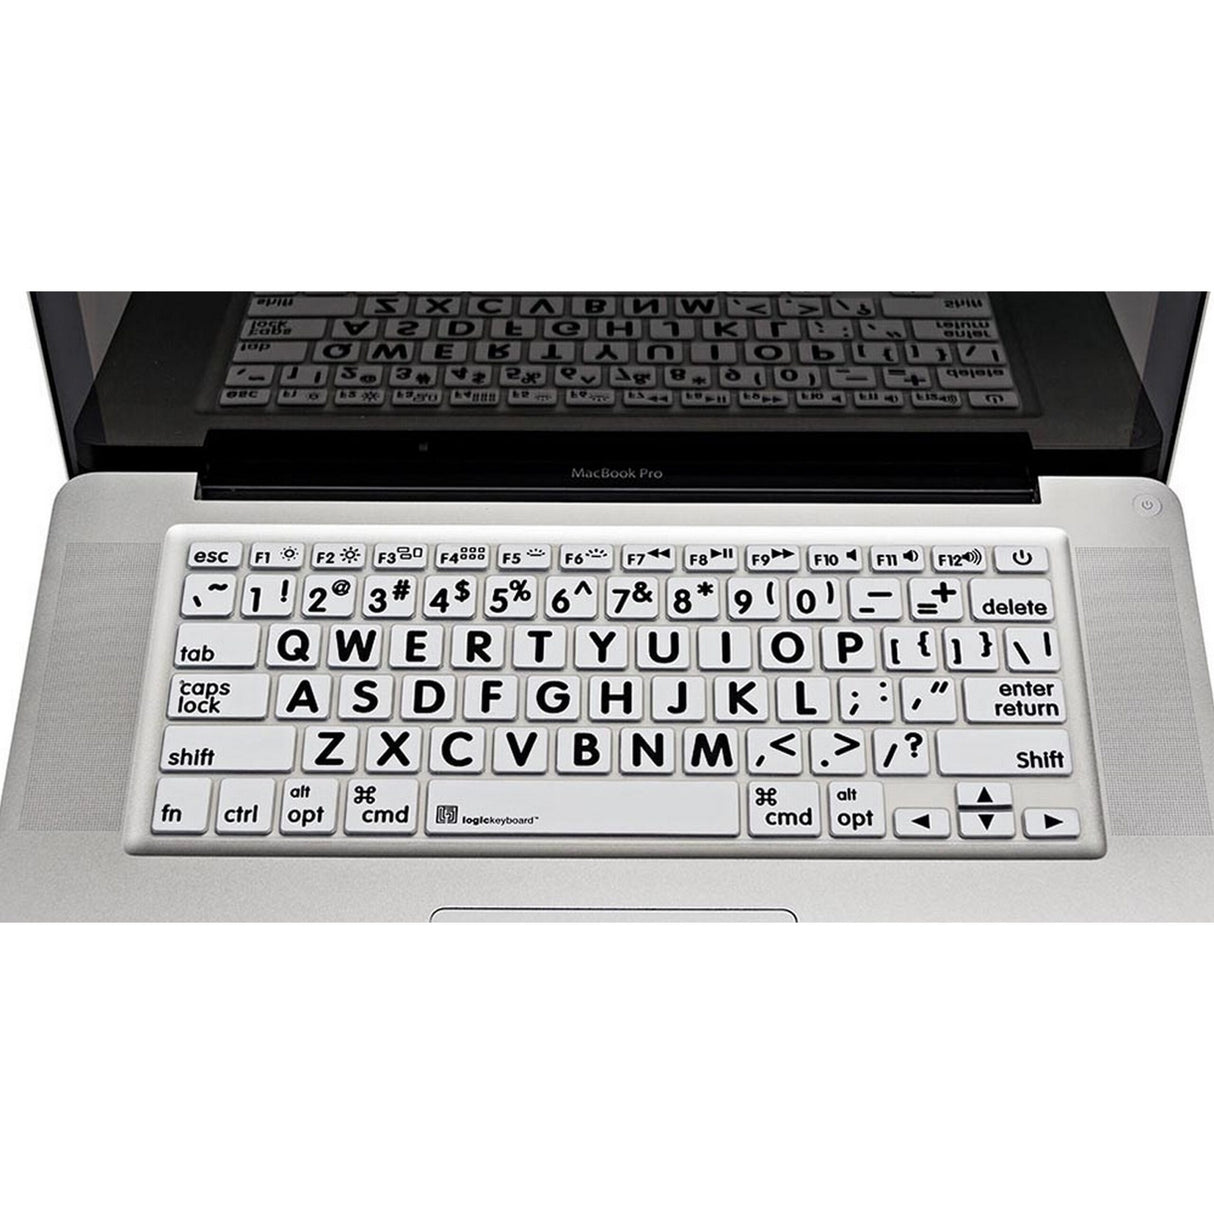 Logickeyboard LS-LPRNTBW-MBUC-US LargePrint Black on White Before 2016 MacBook Pro Keyboard Cover, US